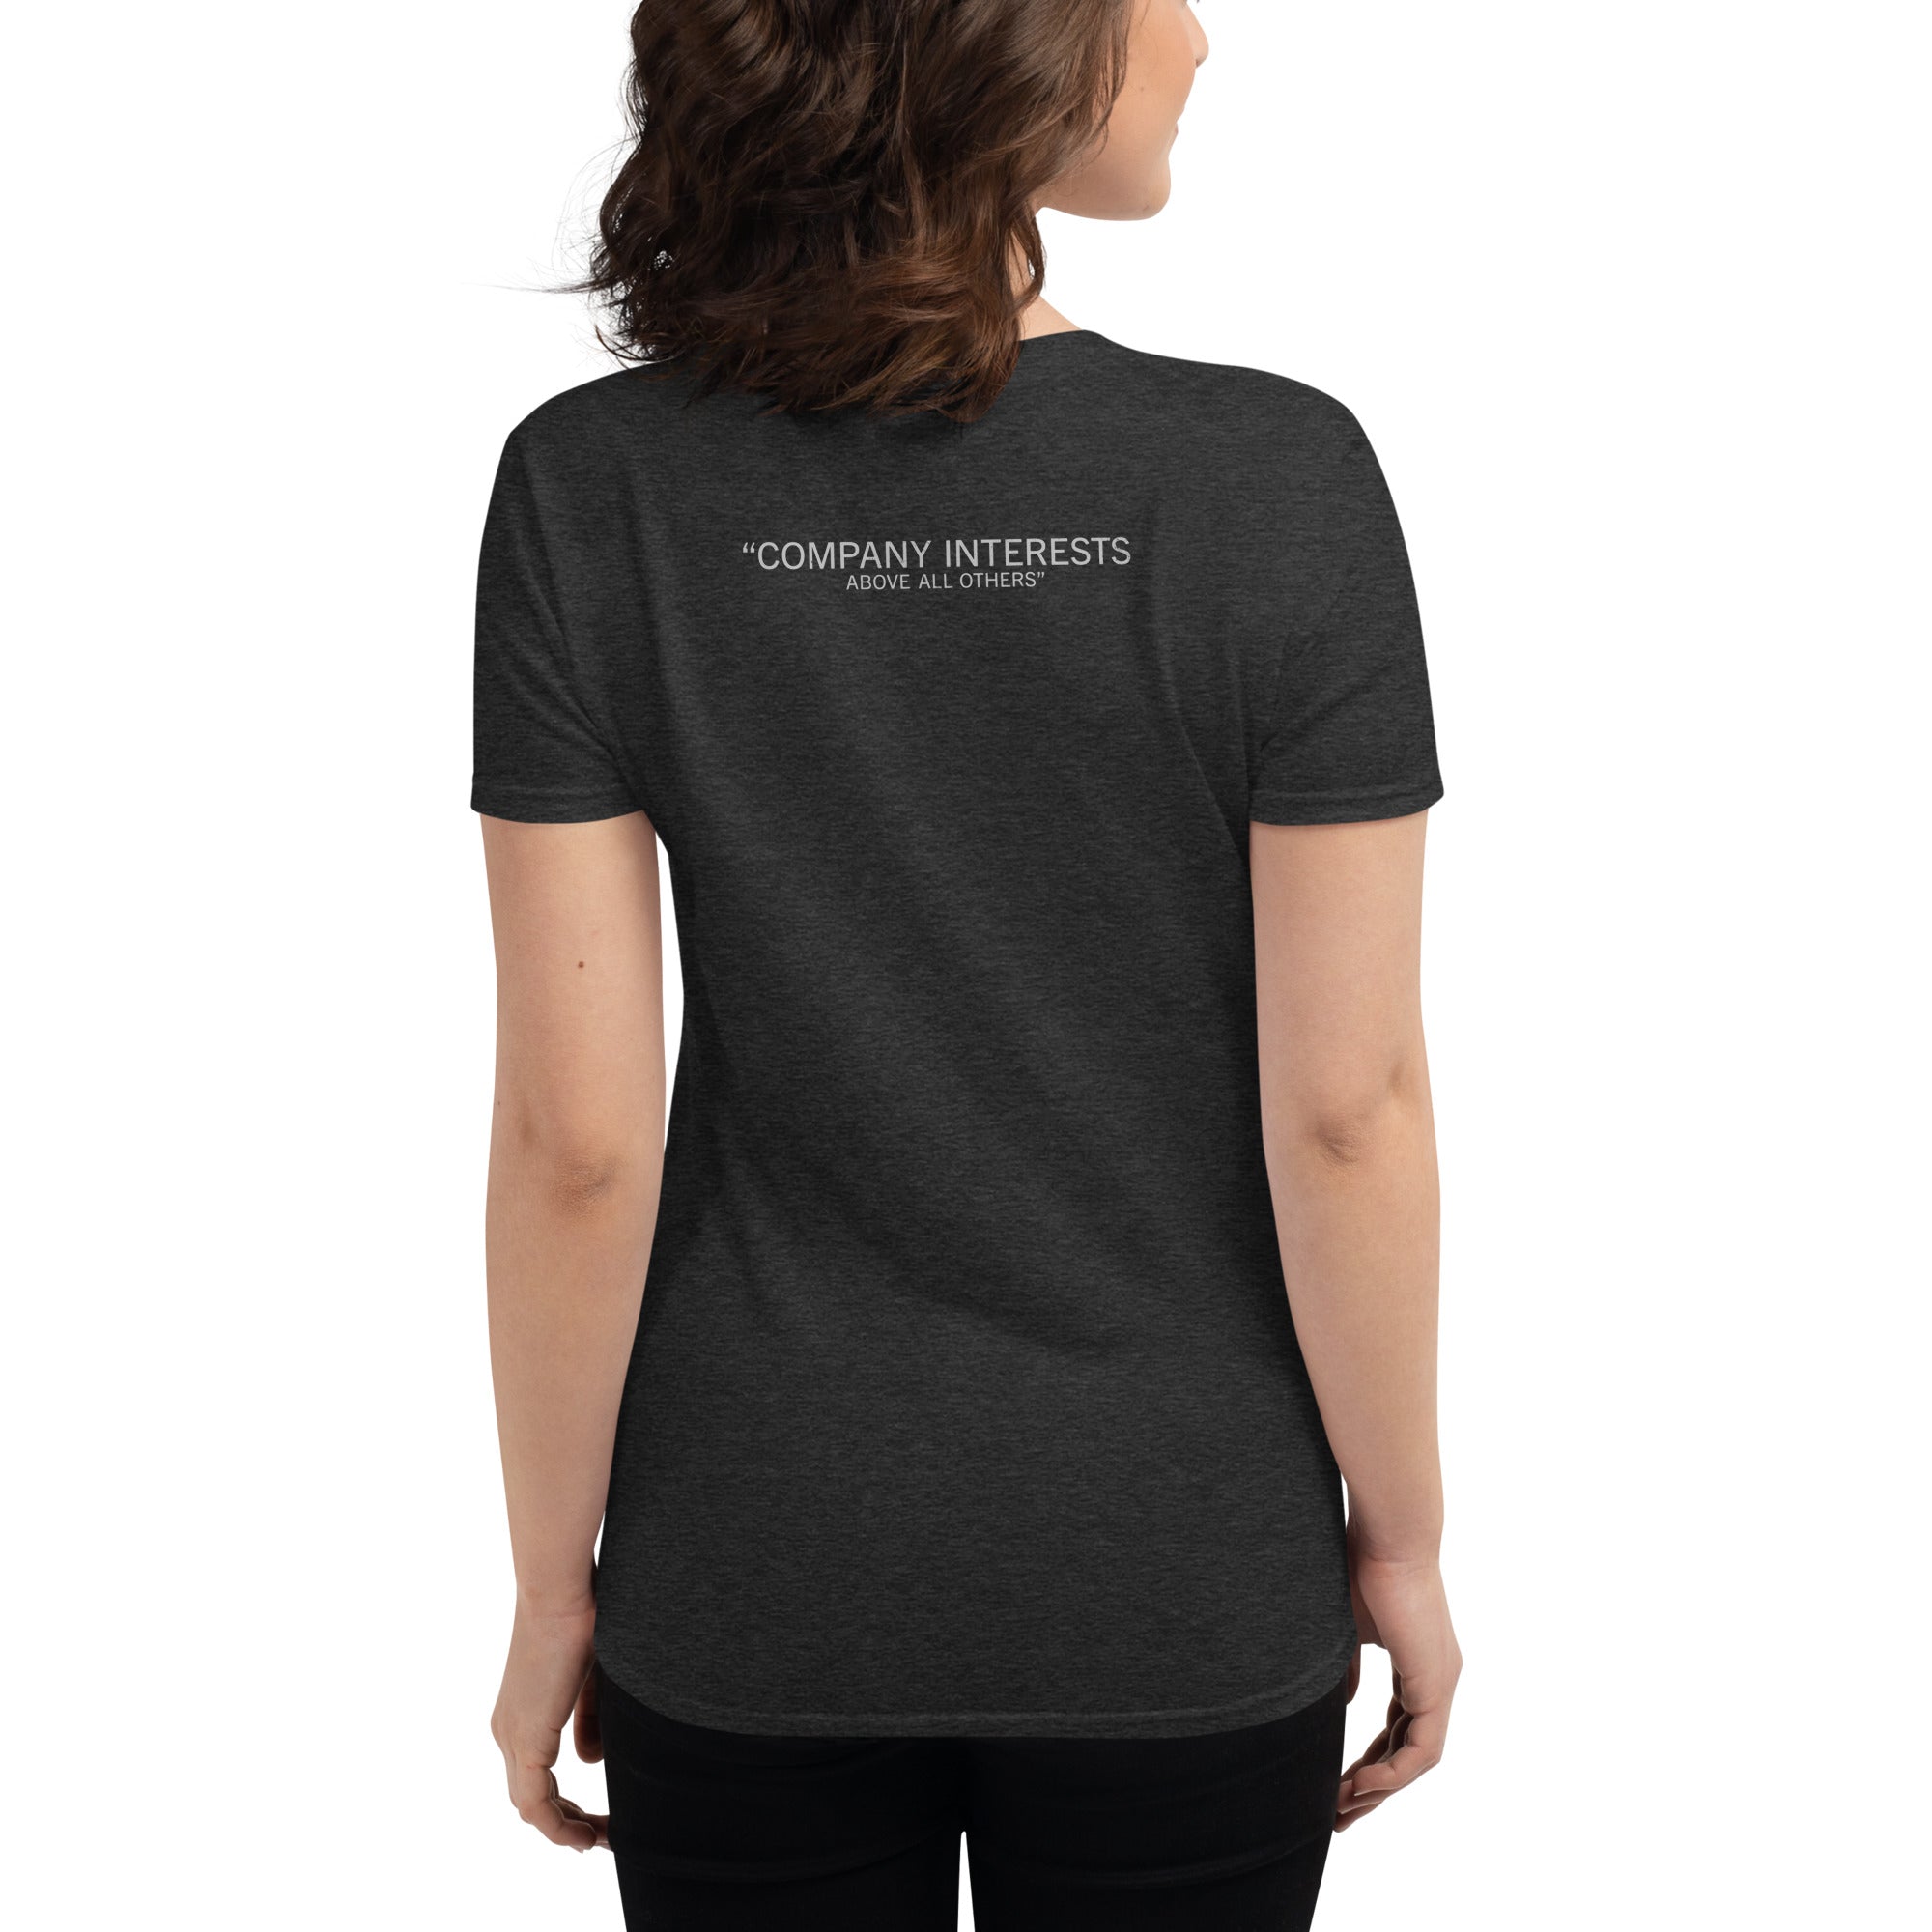 Women's "Company Interests Above All Others" T-Shirt